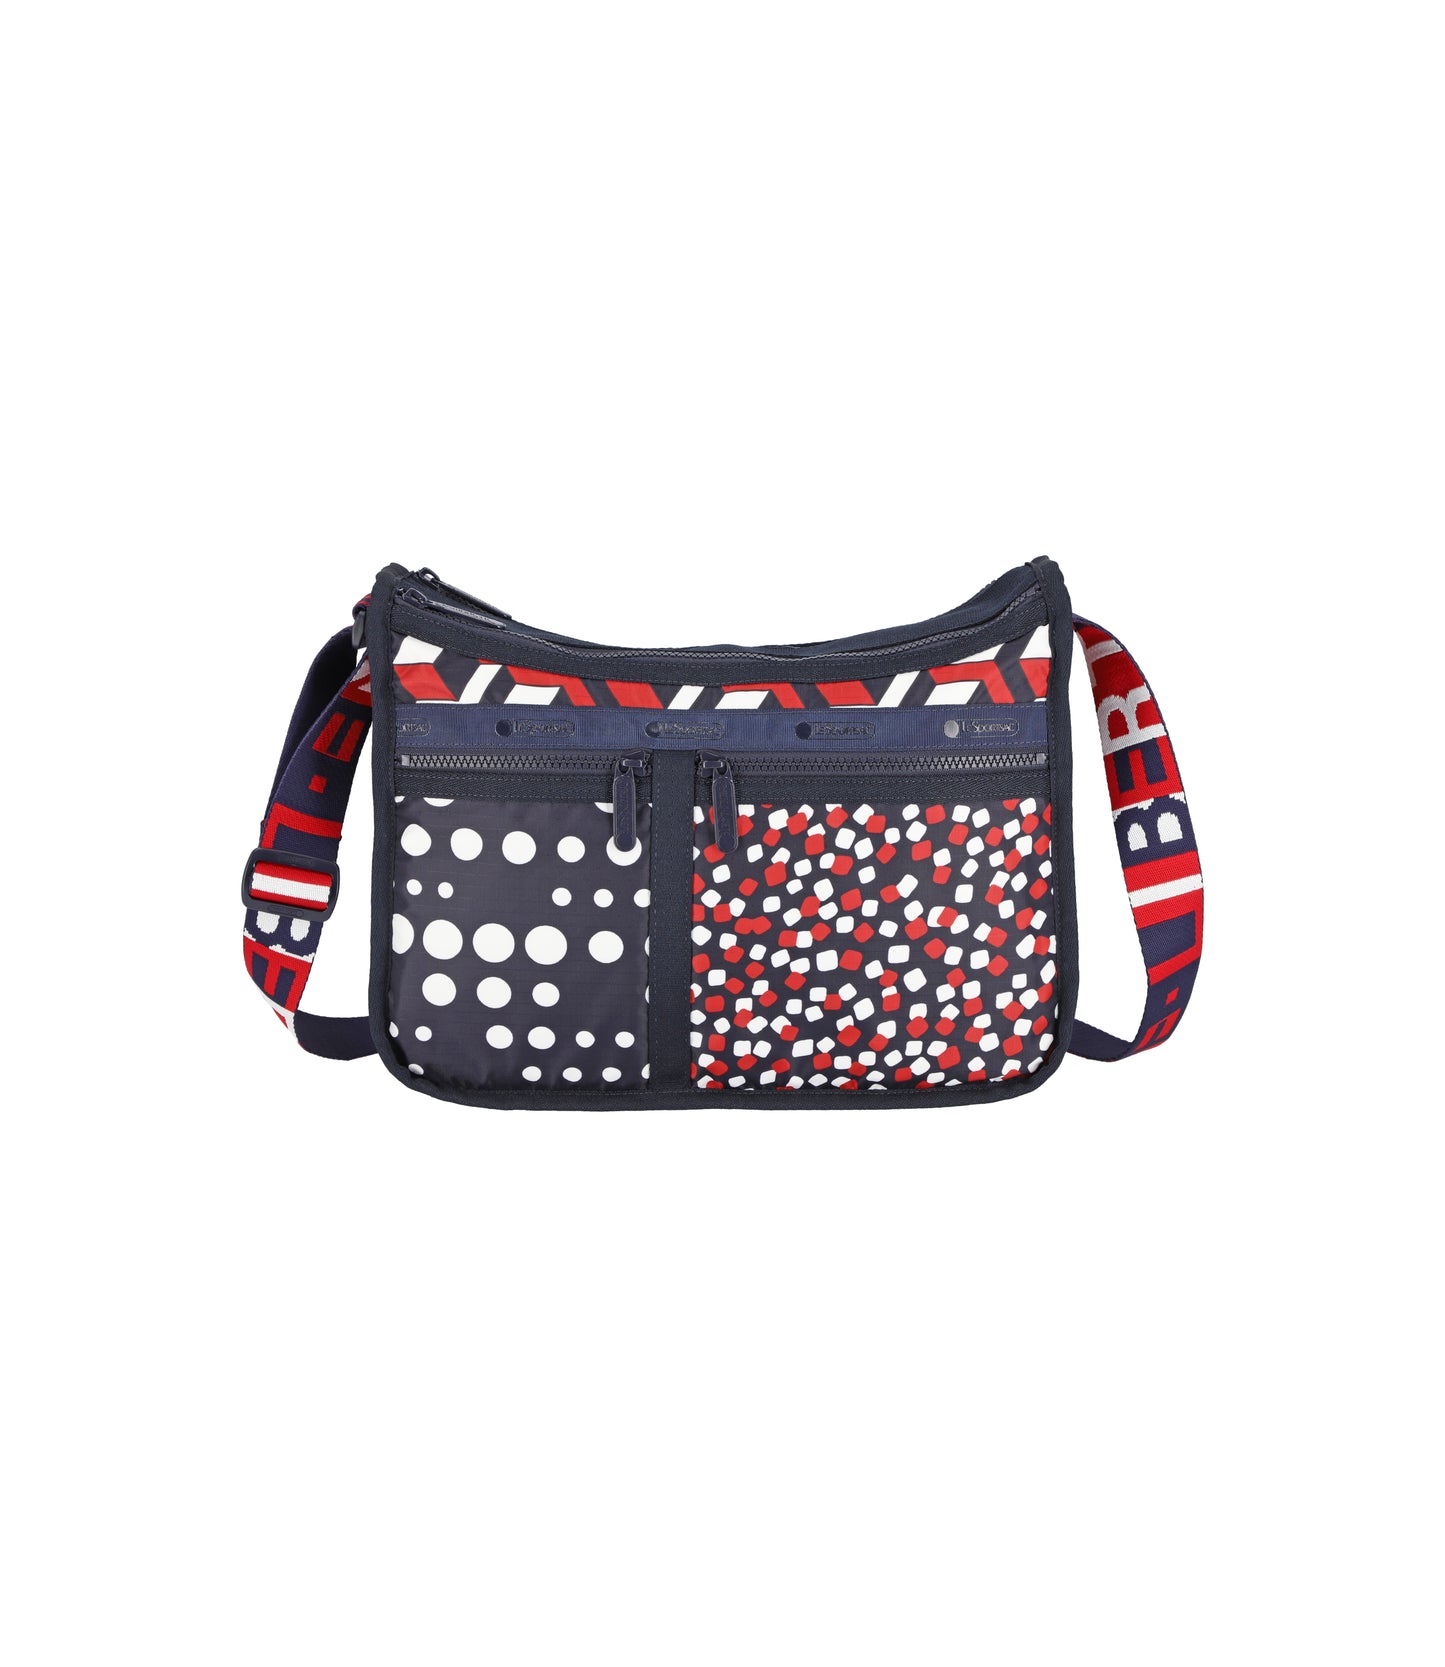 Deluxe Everyday Bag<br>LeSportsac x Libertine Geomix Deluxe